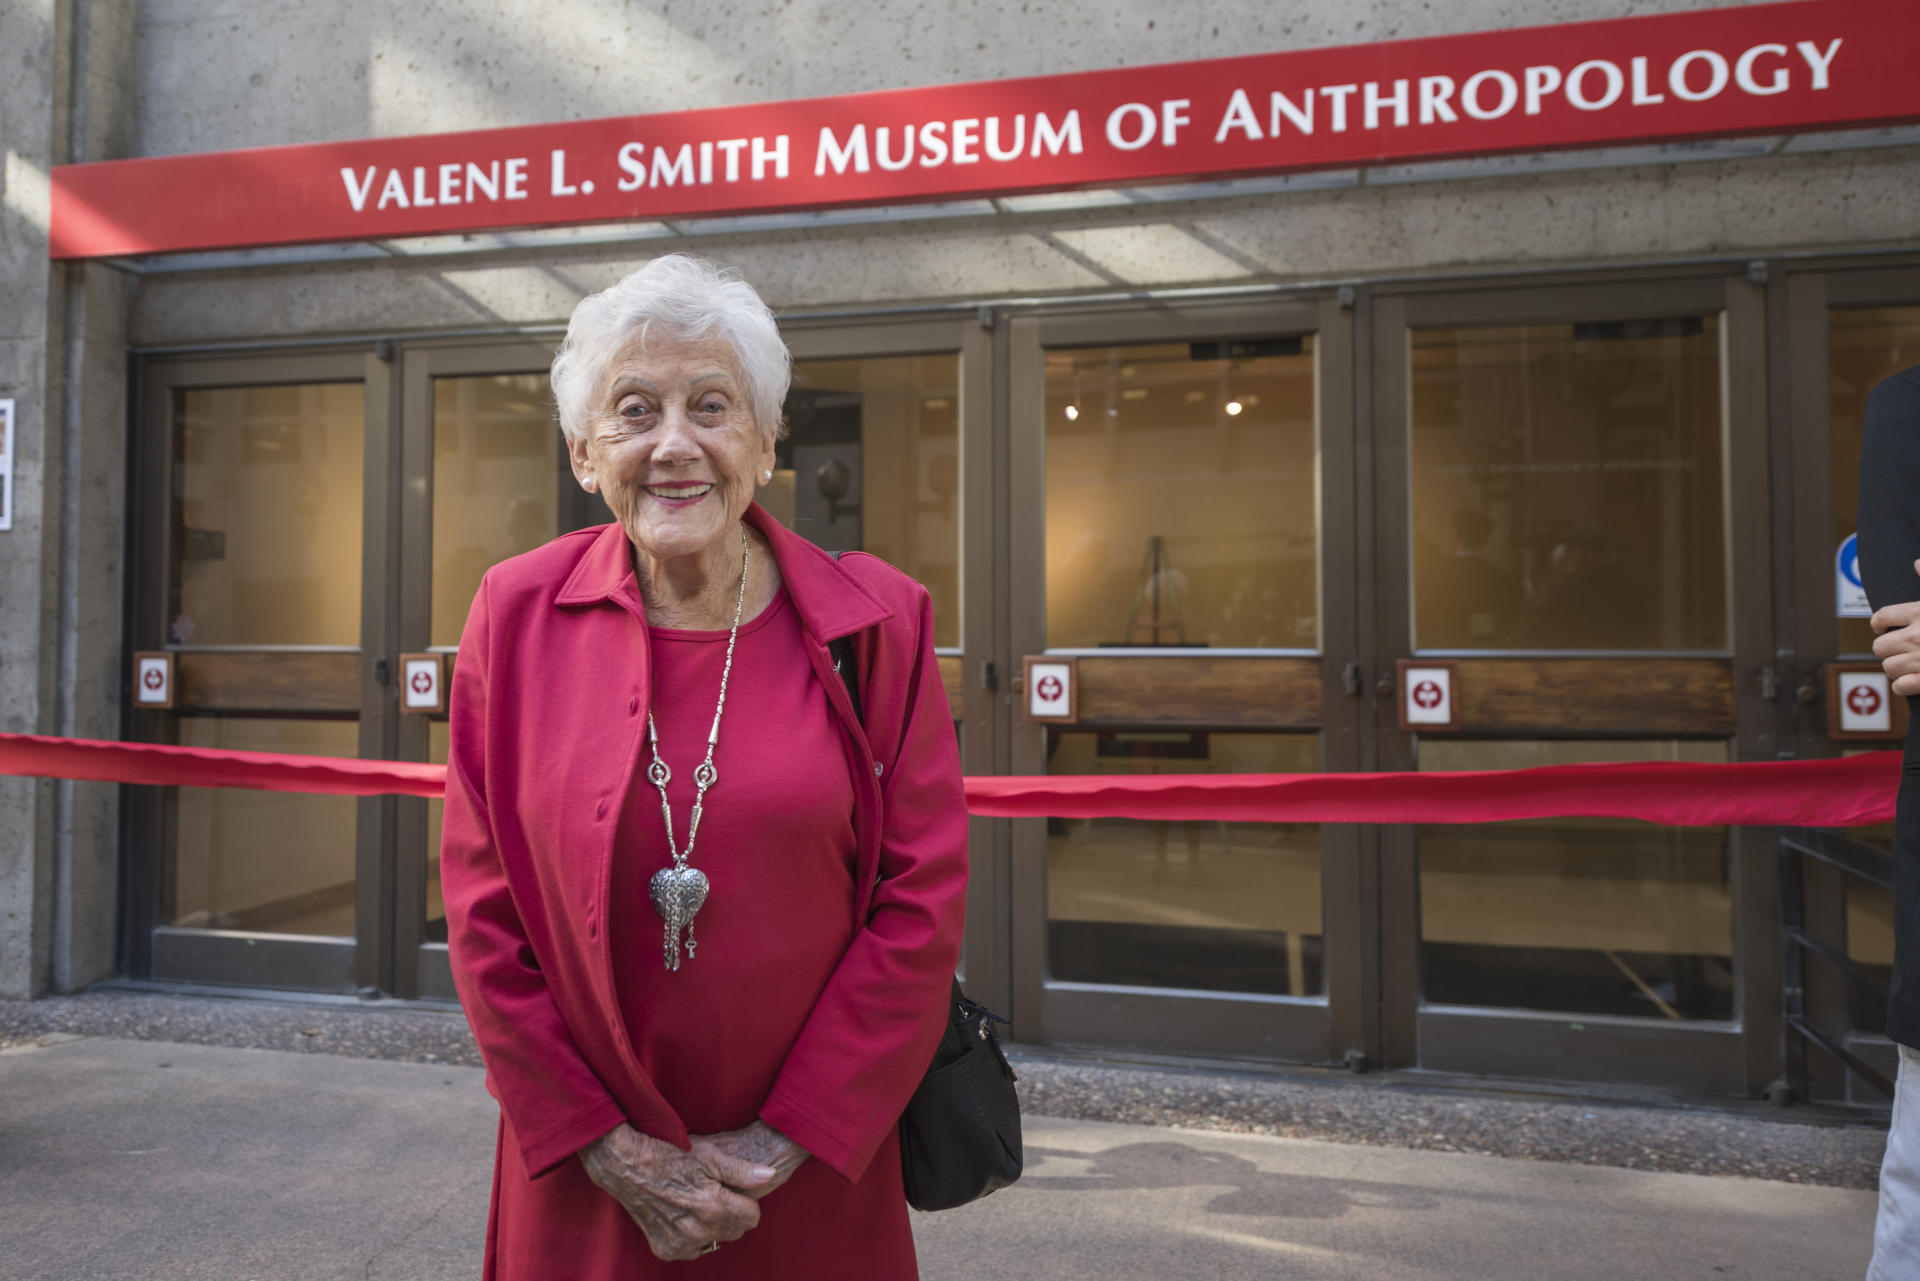 Valene. L Smith stands in front of the Museum bearing her name.